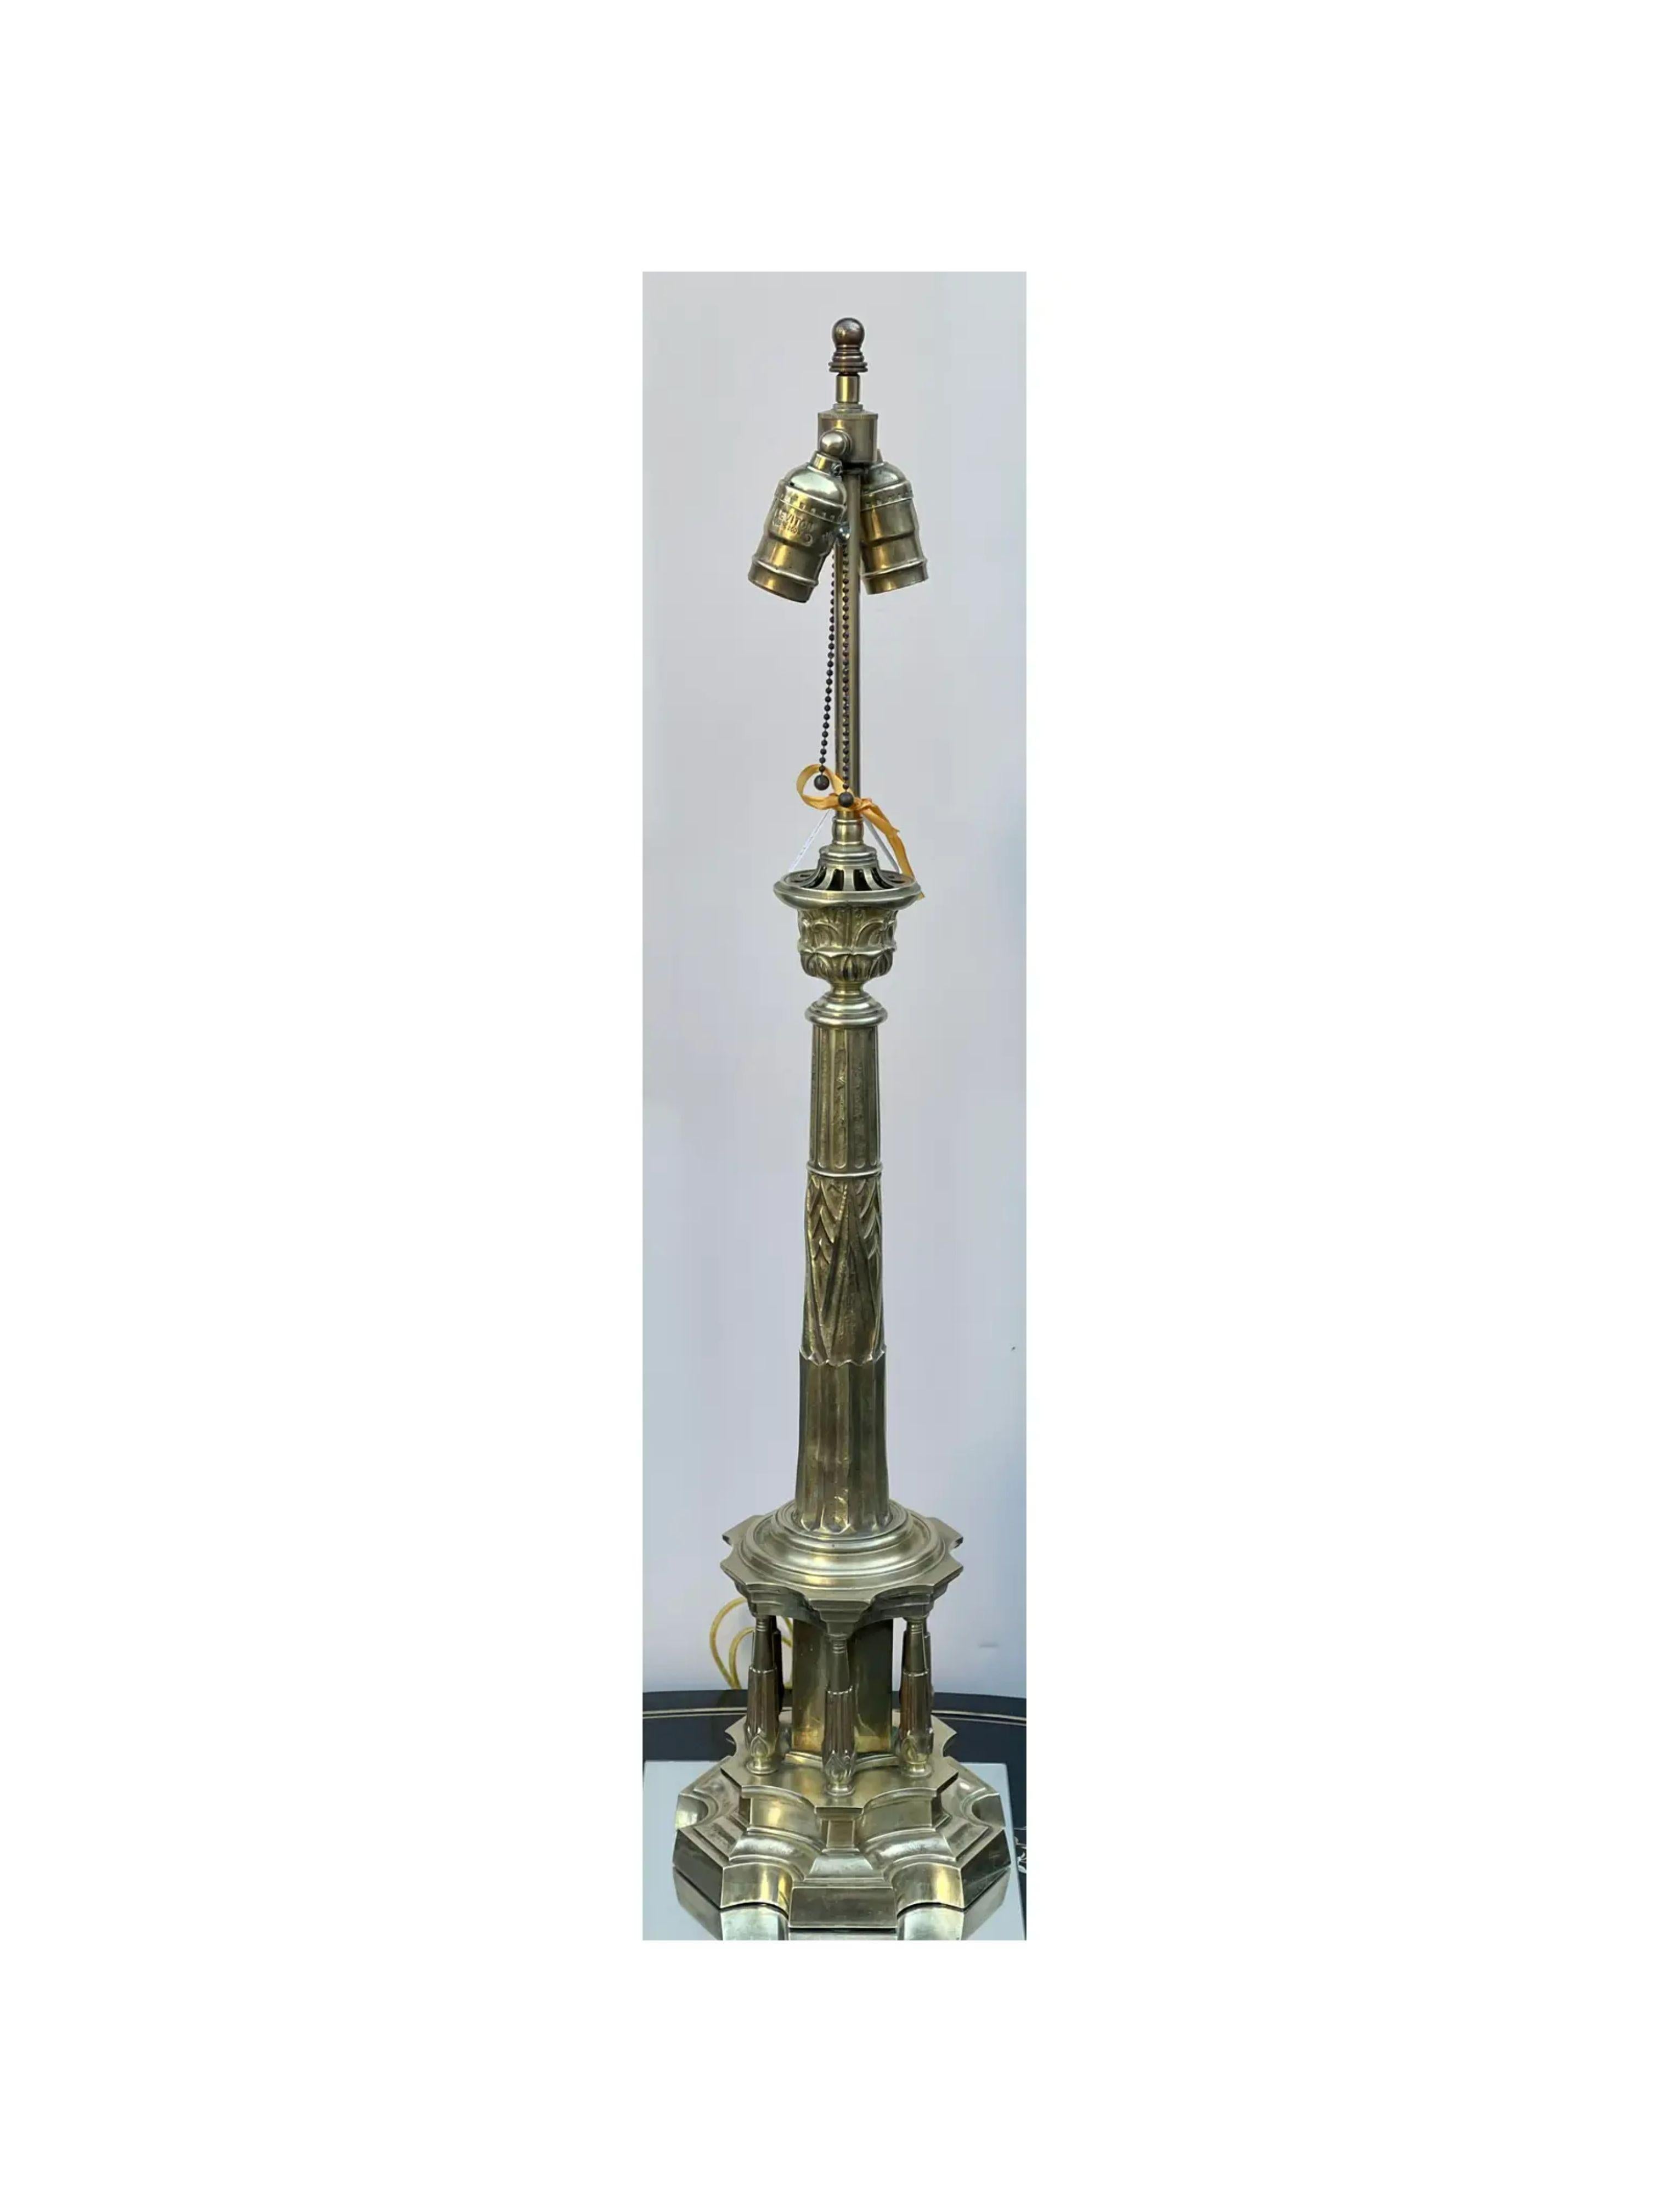 Antique 19th century Empire brass column table lamp

Additional information: 
Materials: Brass
Color: Gold
Period: early 19th century
Styles: Empire
Lamp Shade: Not Included
Item Type: Vintage, Antique or Pre-owned
Dimensions: 7